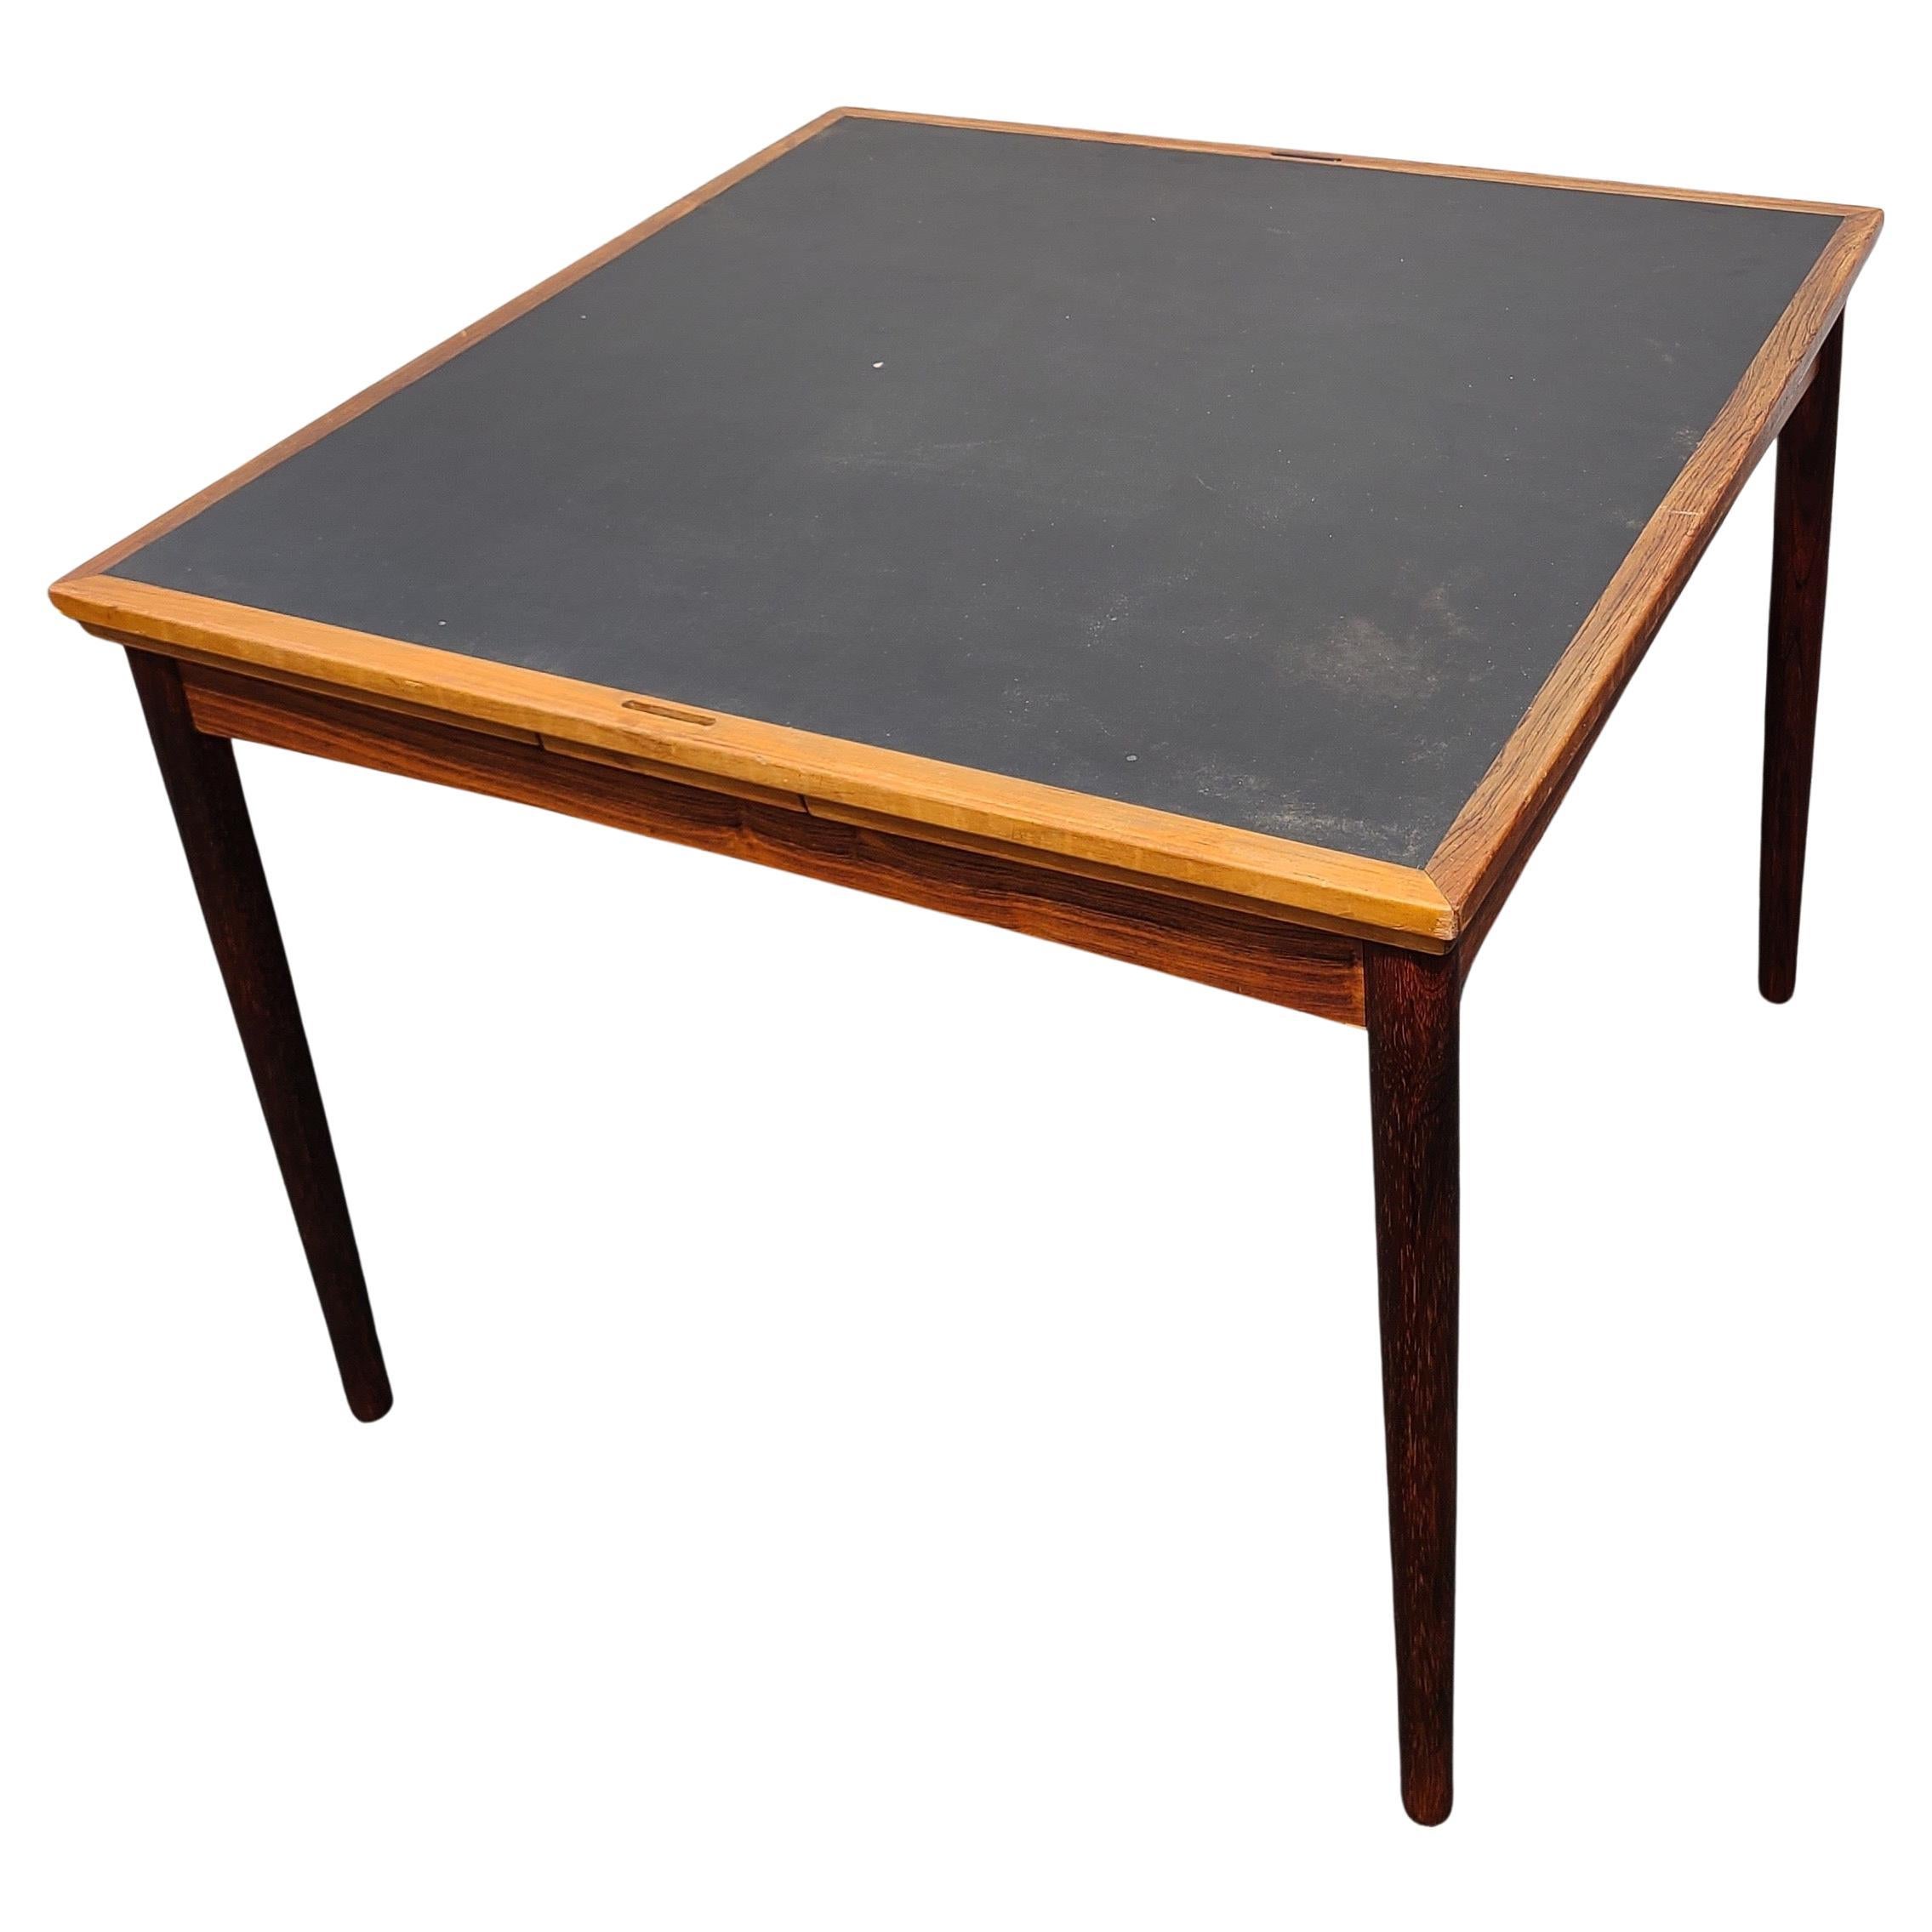 Please message us for a cost effective shipping quote to your location.

Danish Rosewood and Leather Dining Table and Game Table.

Top flips manually. Extensions are stowed under top.

Designed by Carlo Jensen for Poul Hundevad.

Circa 1960. Side